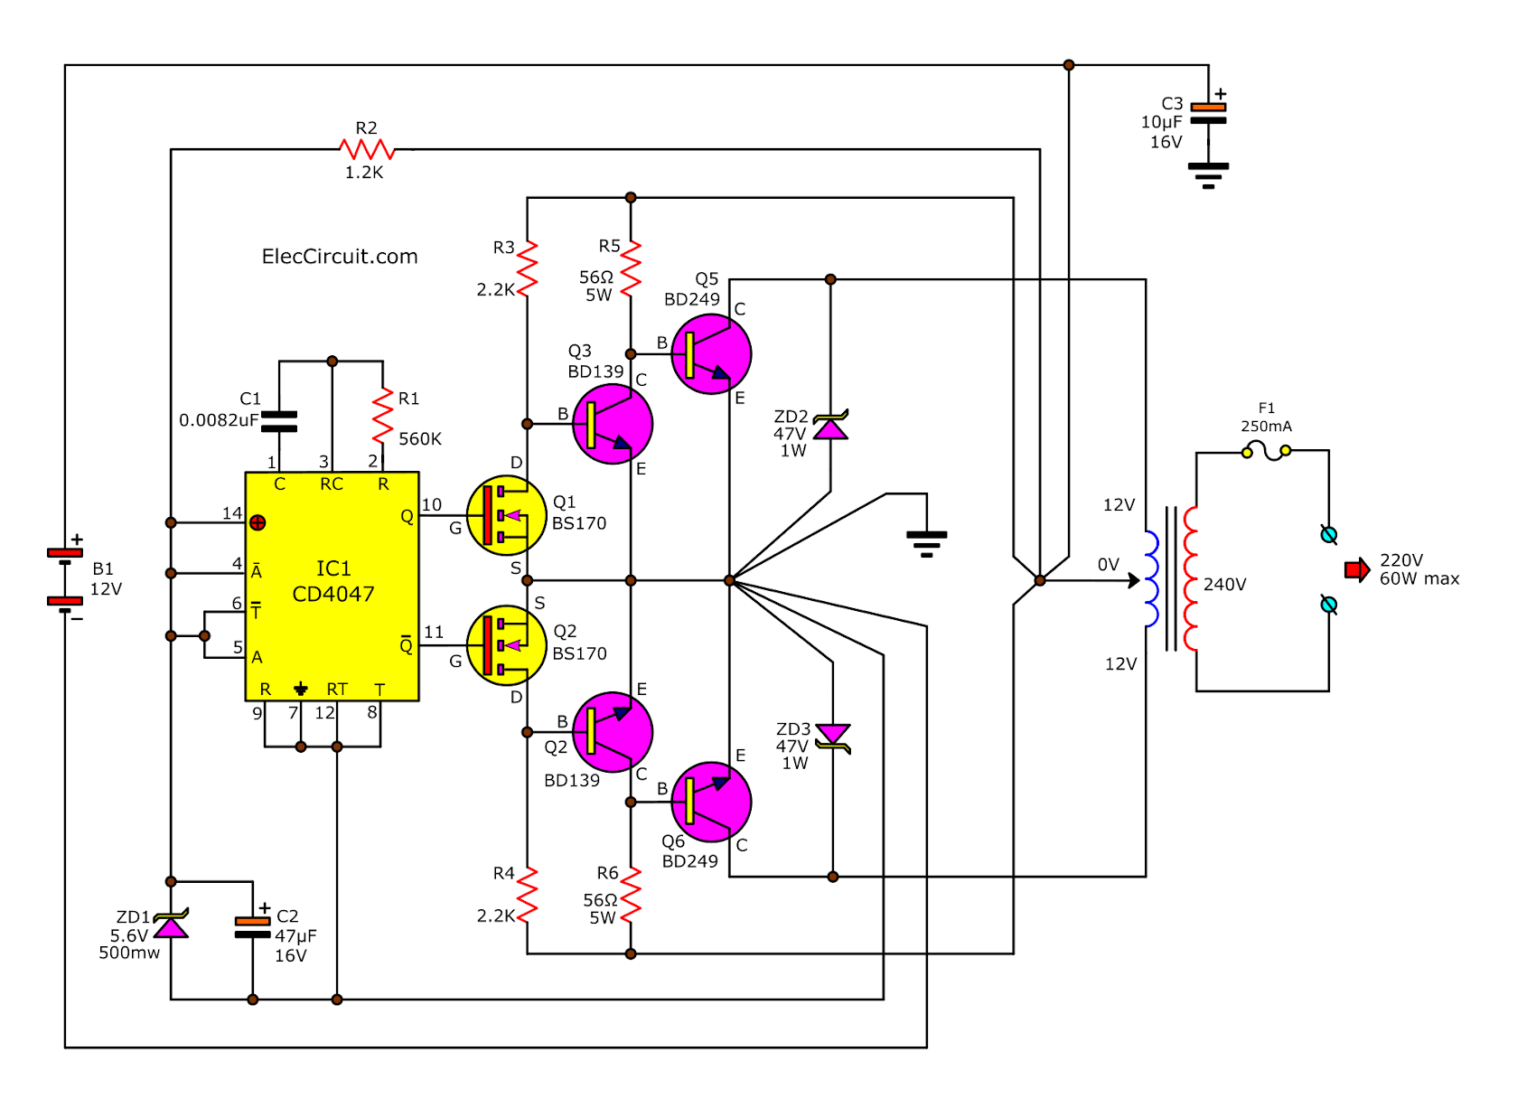 DC to AC Converter circuit projects on ElecCircuit.com